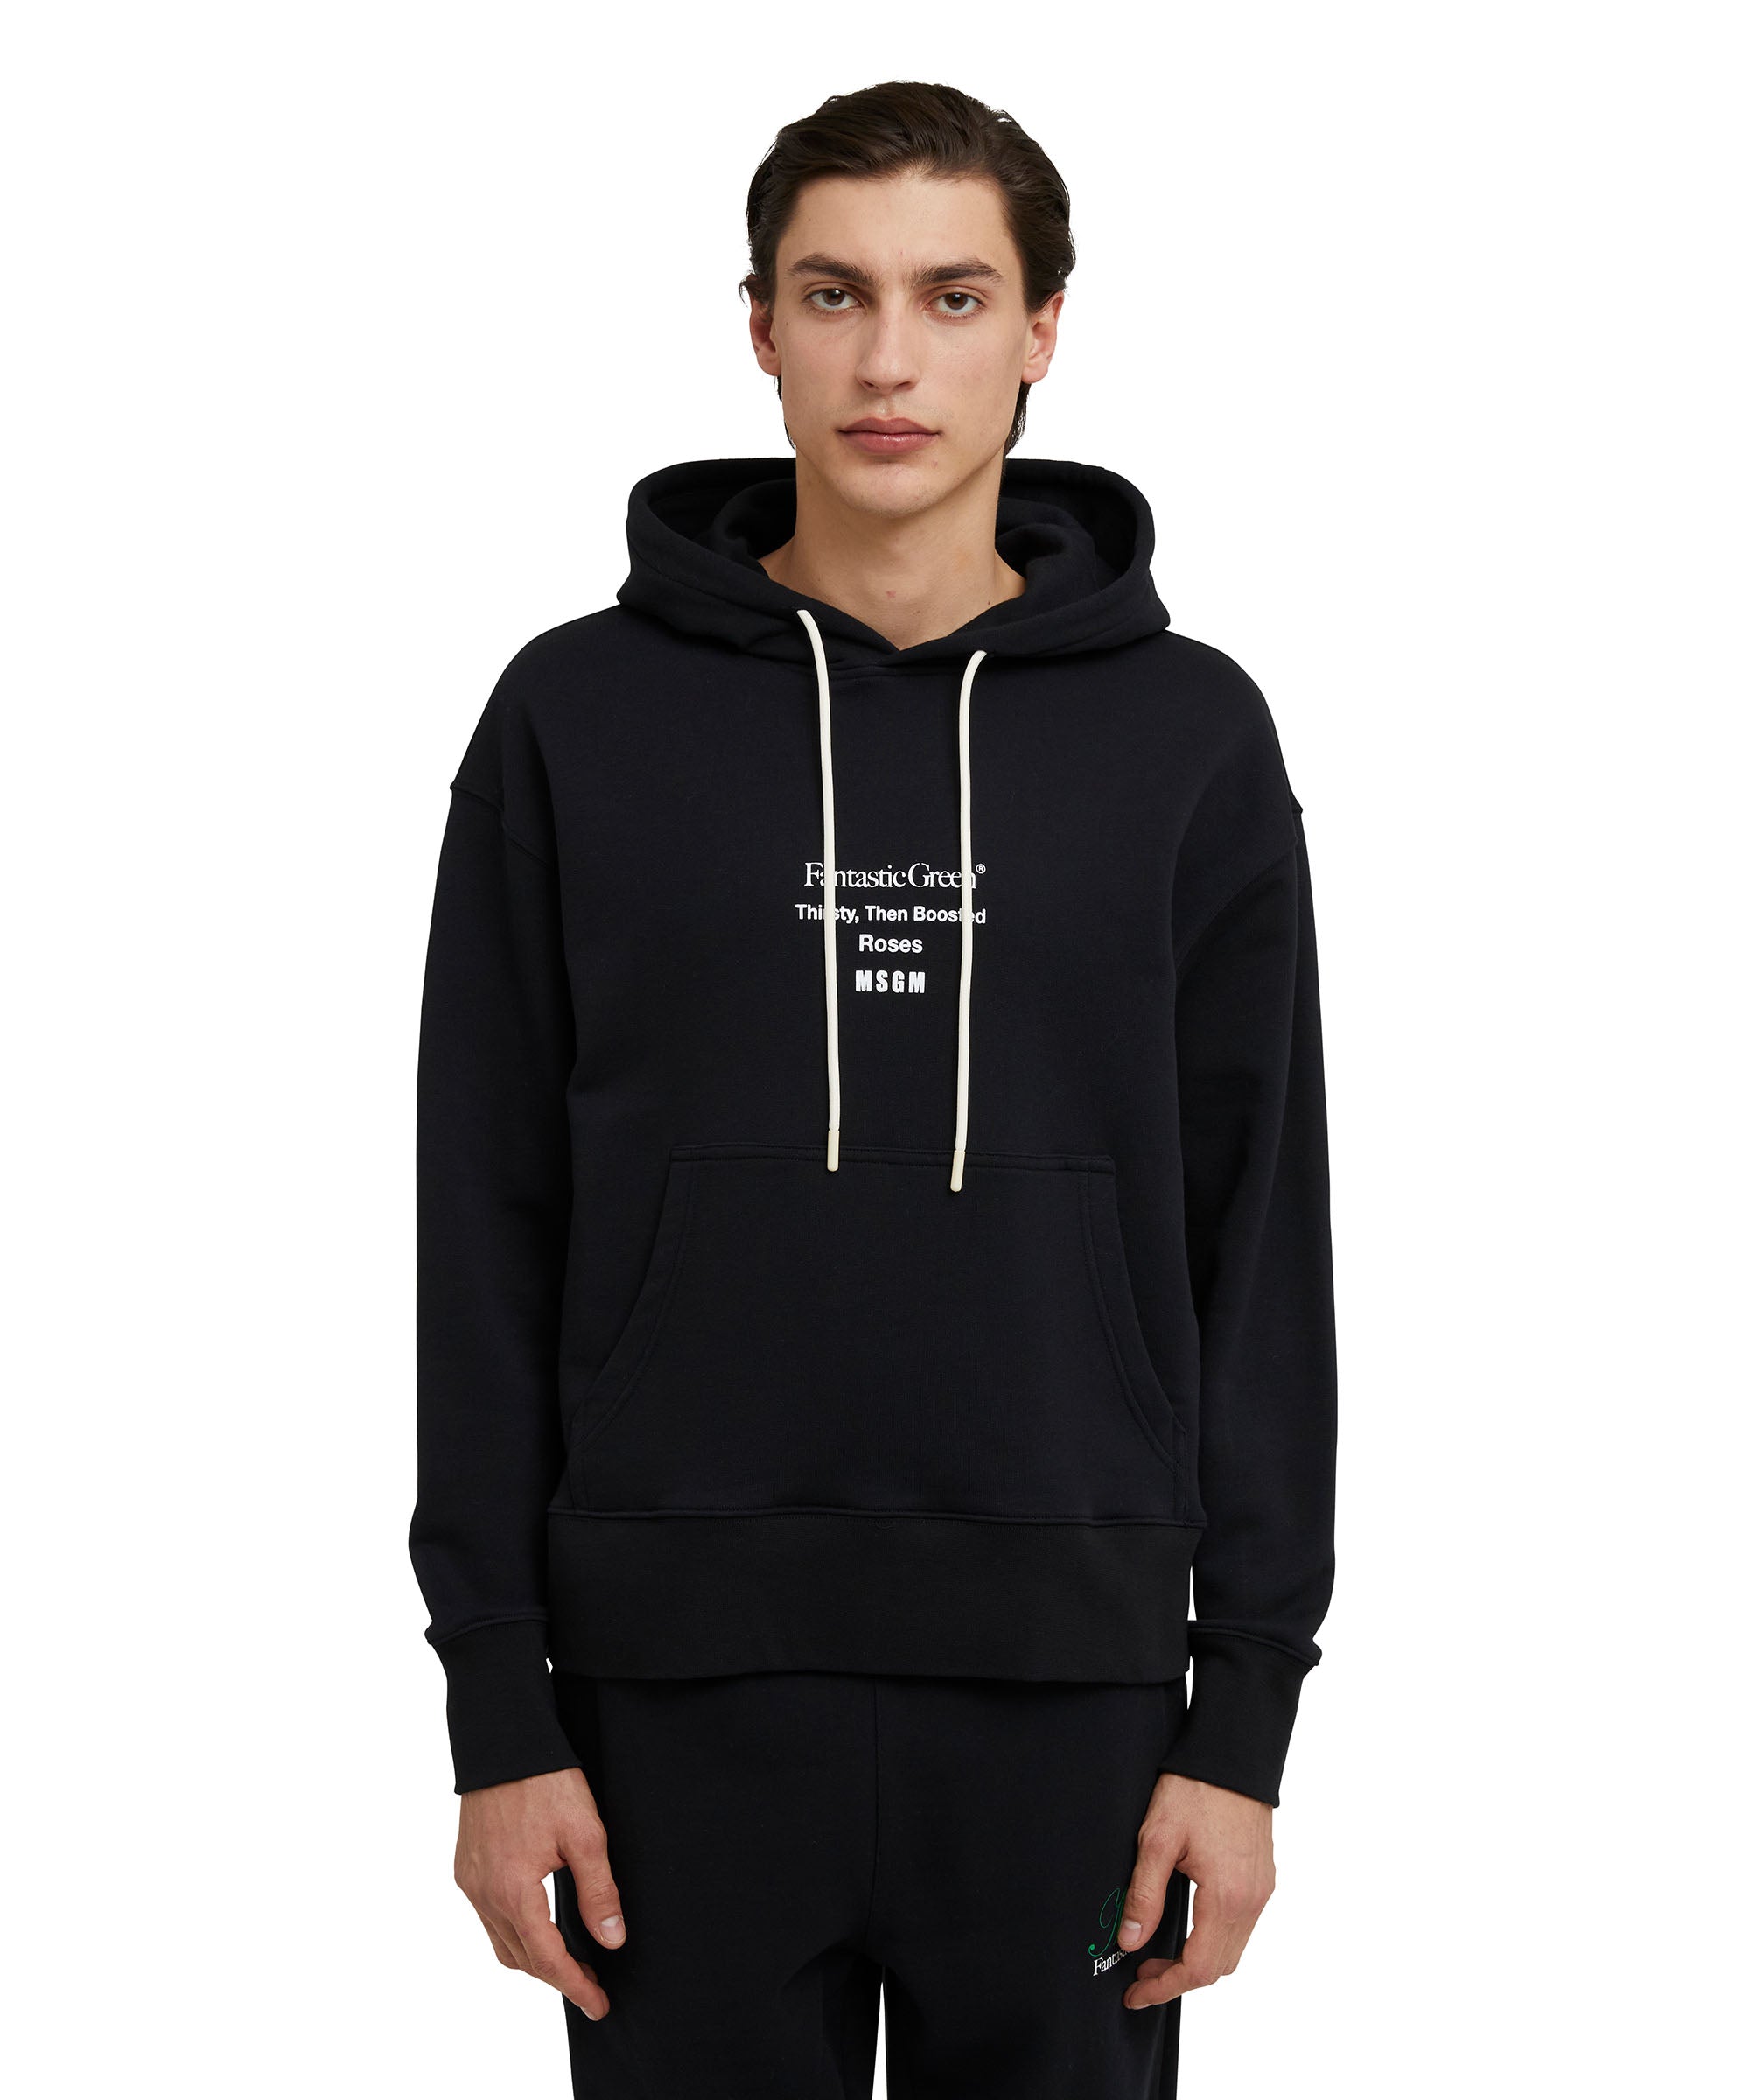 MSGM Clothing for Men - Ready to wear – MSGM Shop ROW - MSGM Official